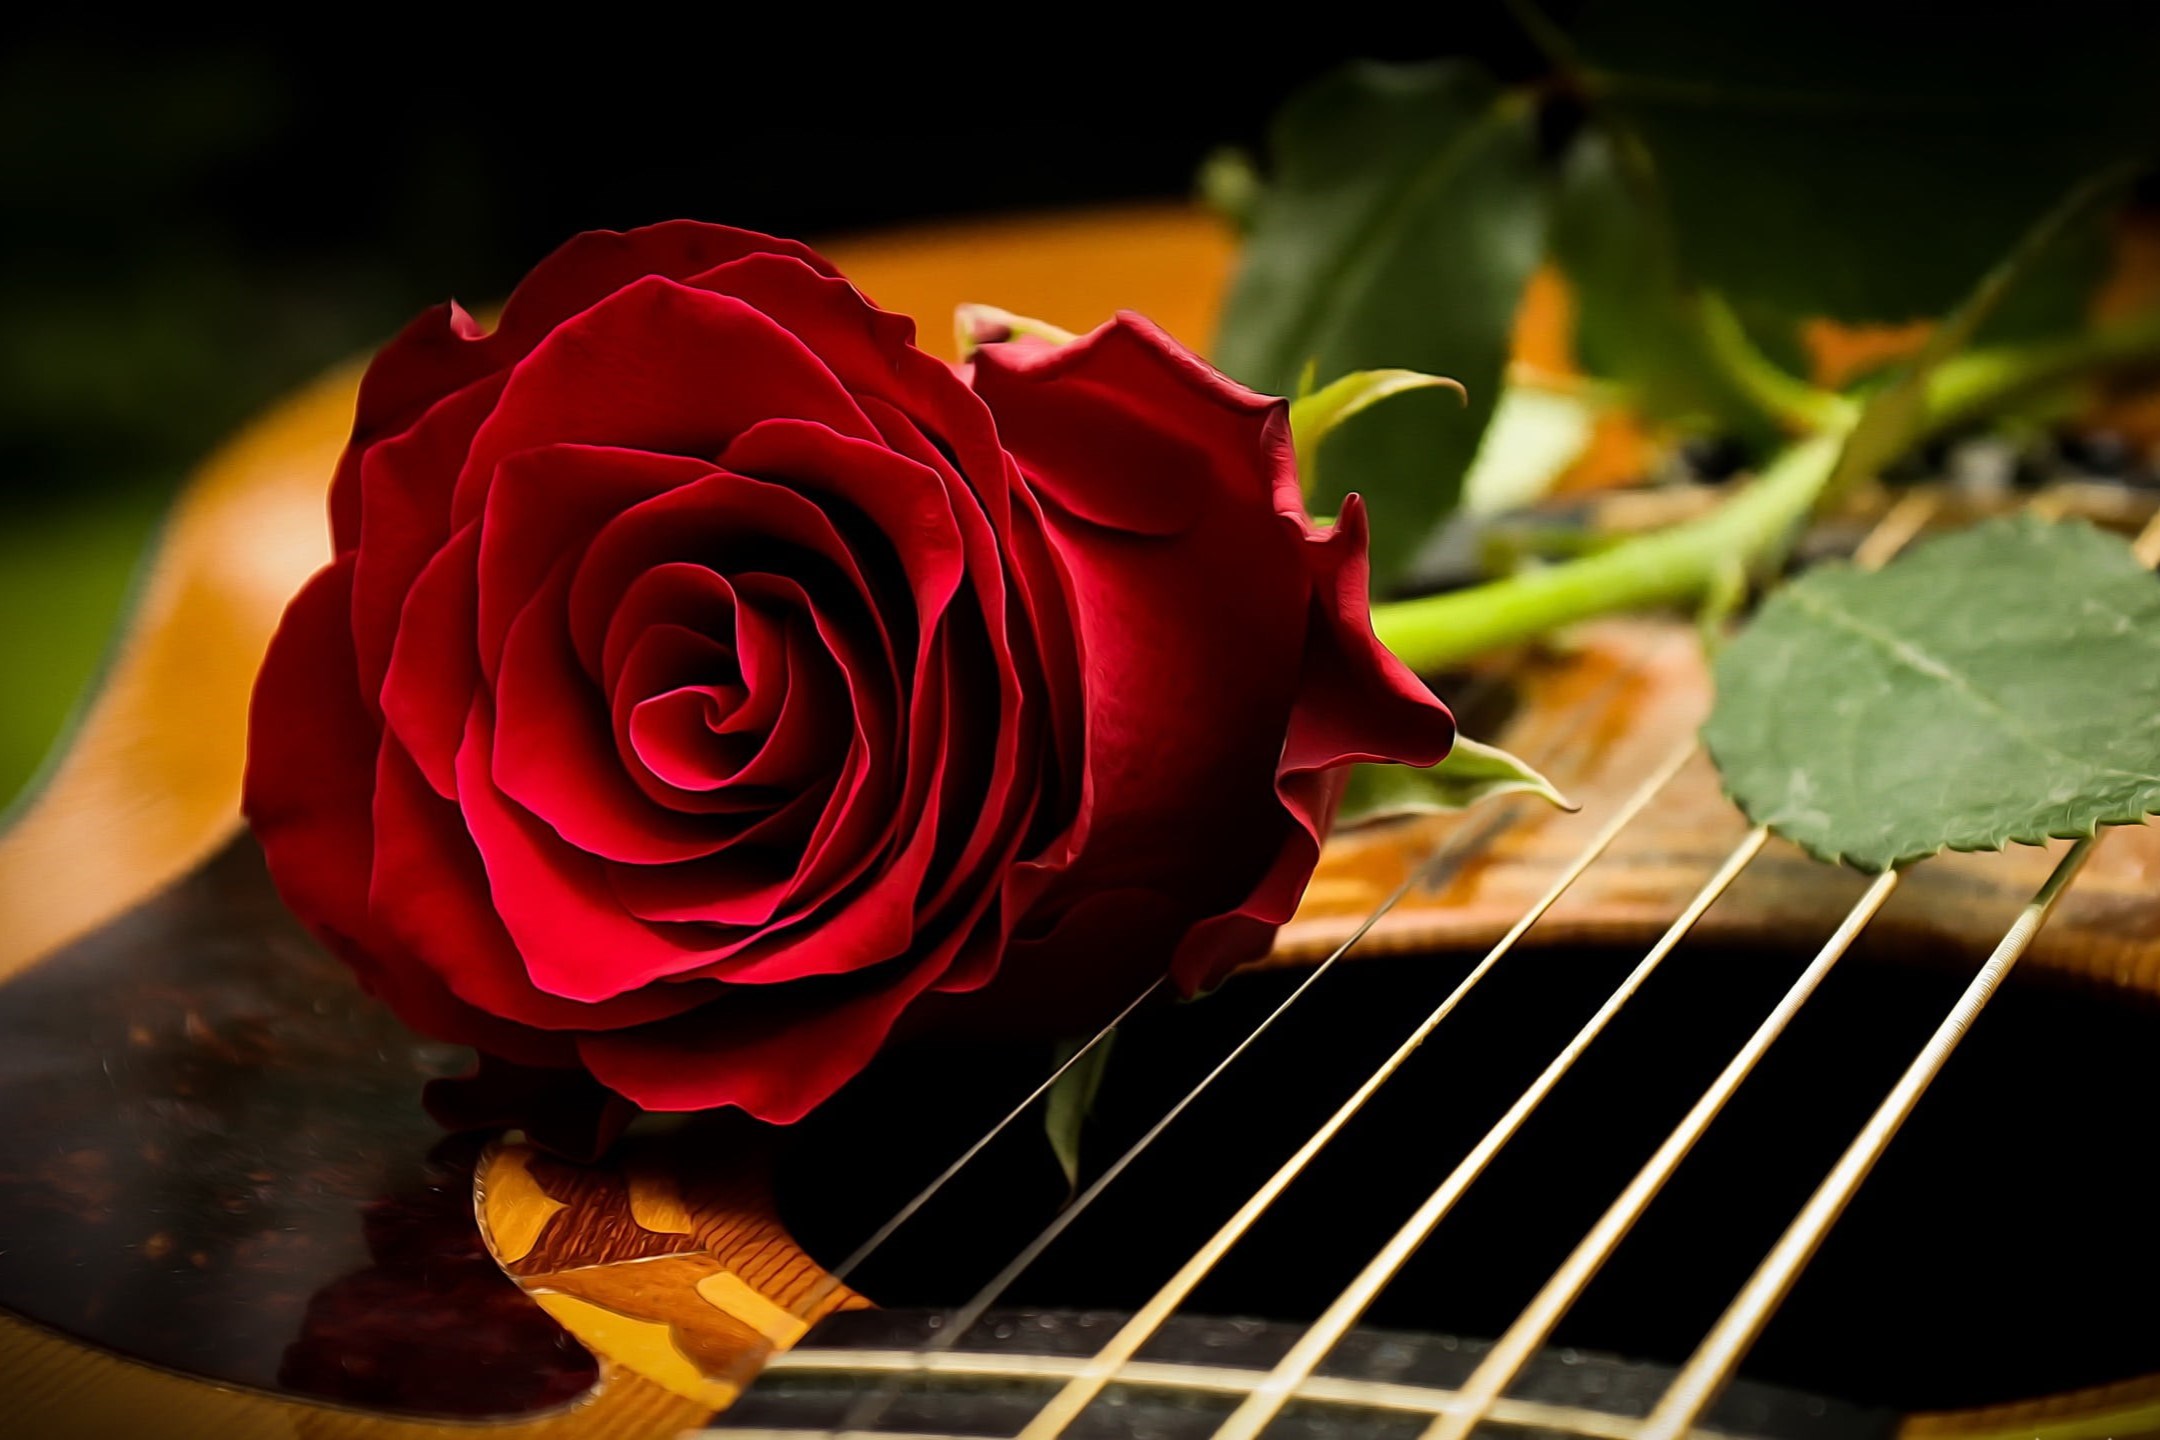 Top 10 Songs That Bloom With The Word ‘Flowers’ – A Melodic Garden Of Musical Delights!